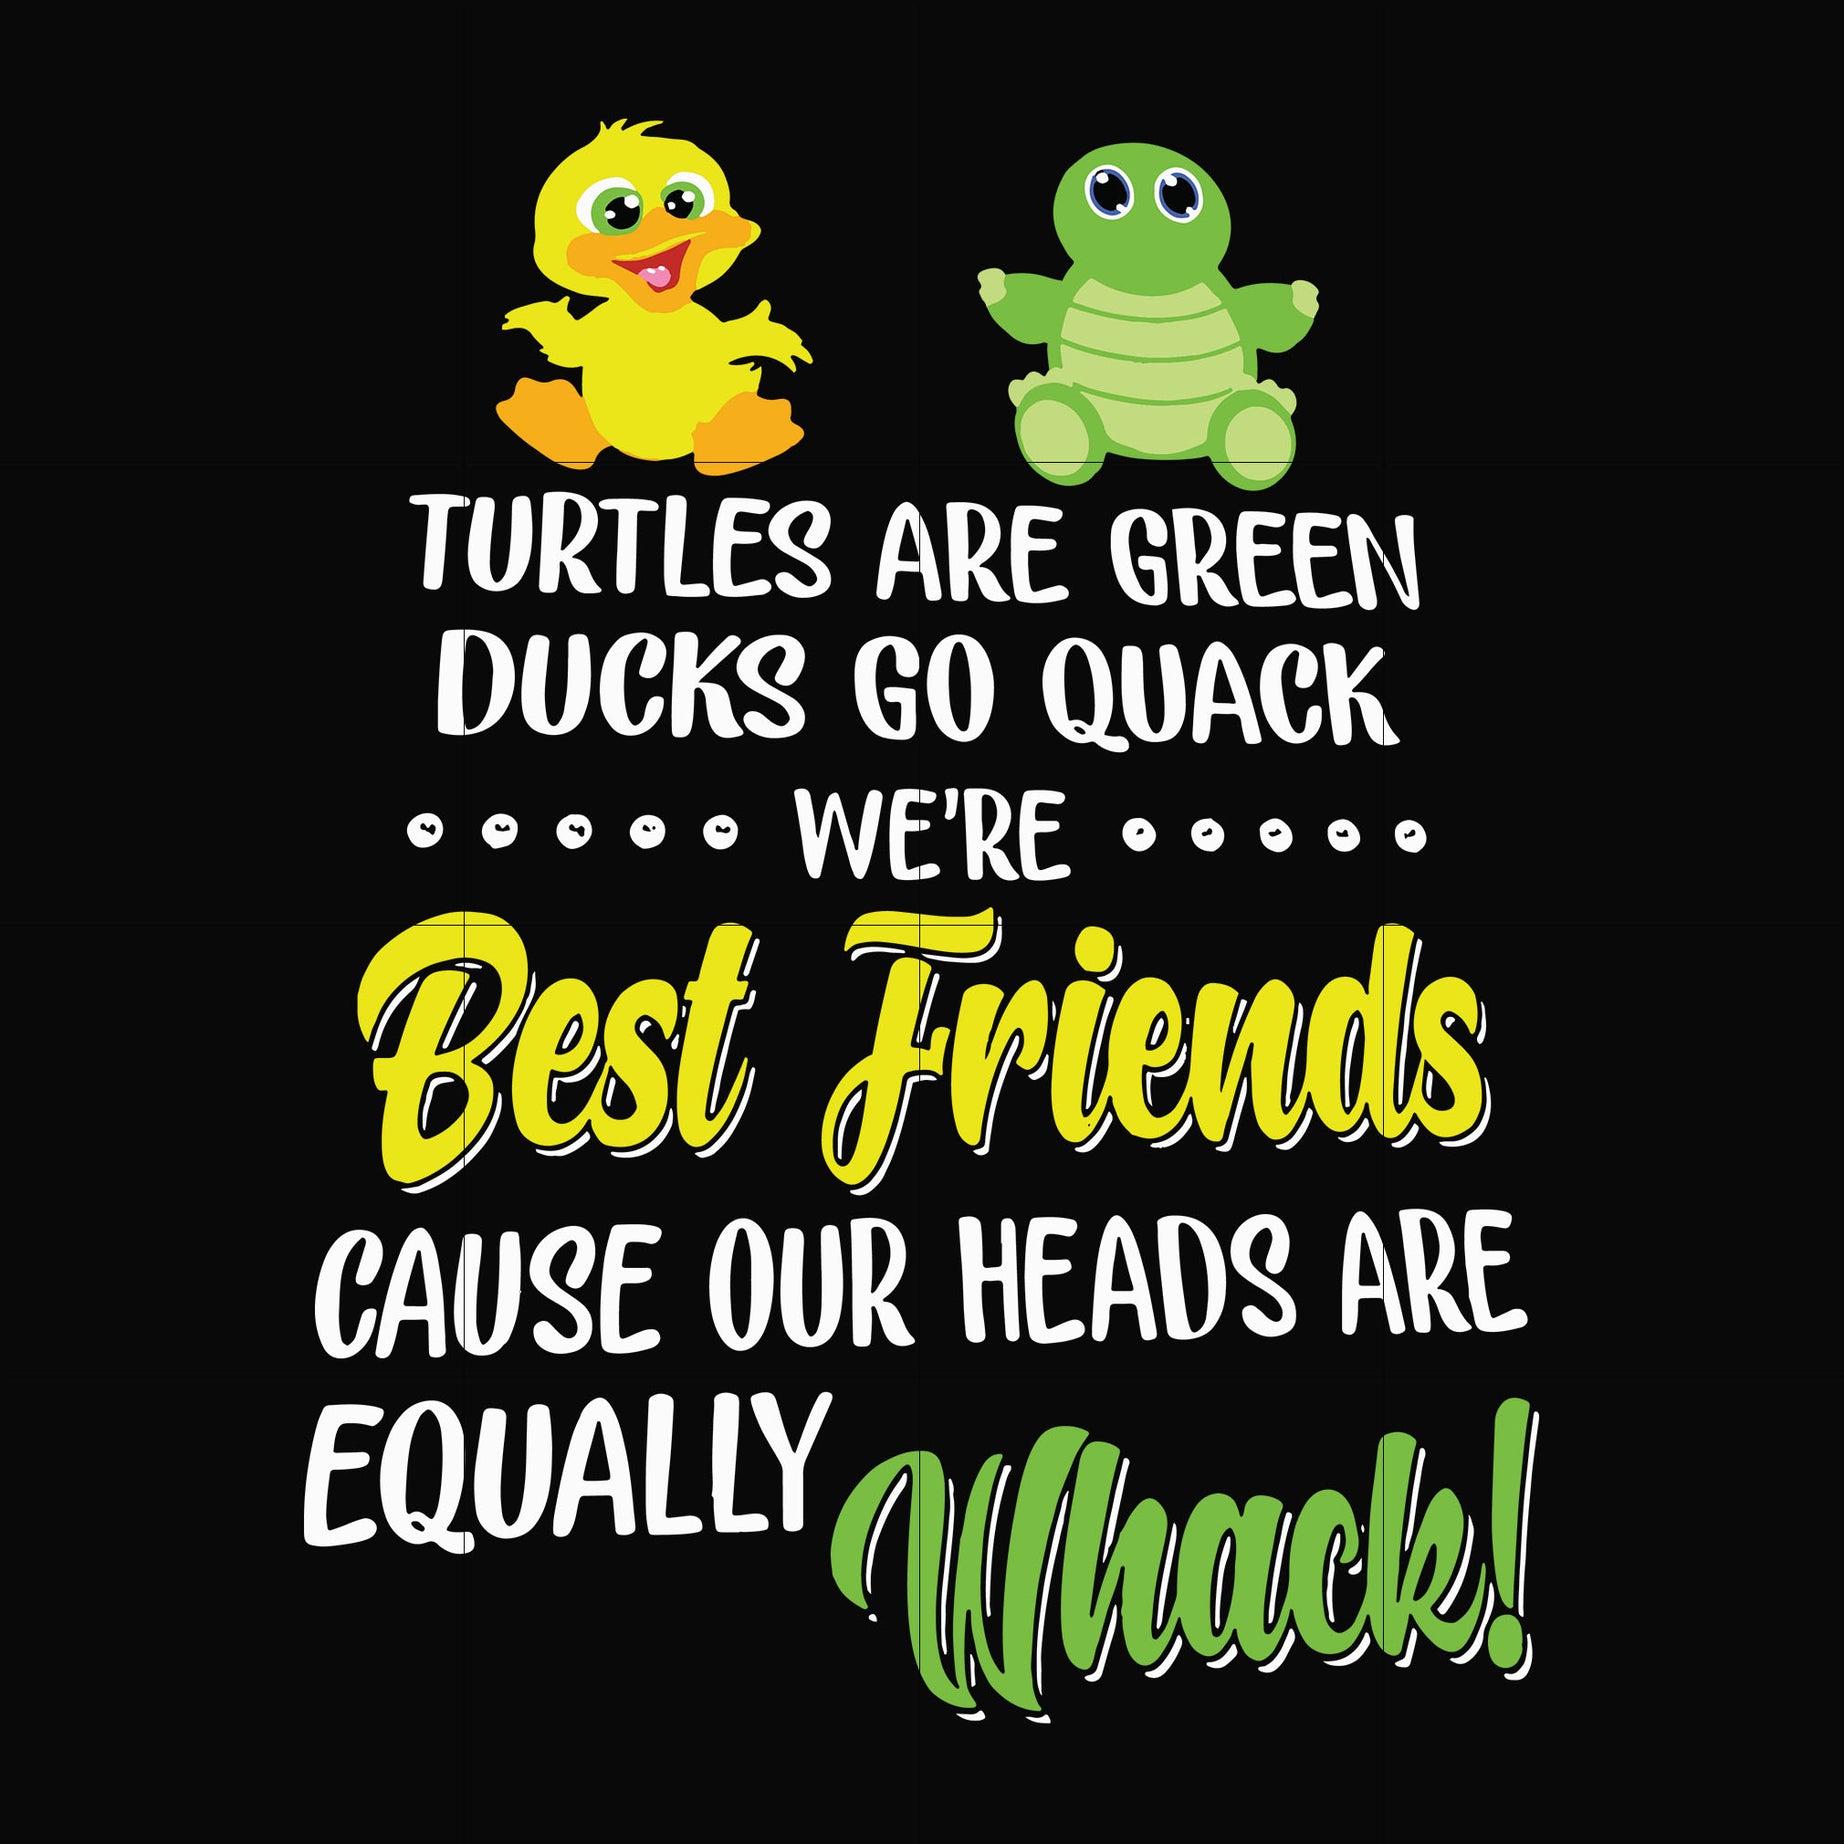 Turtles are green ducks go quack we're best friends cause our heads are equally whack svg, png, dxf, eps file FN00034